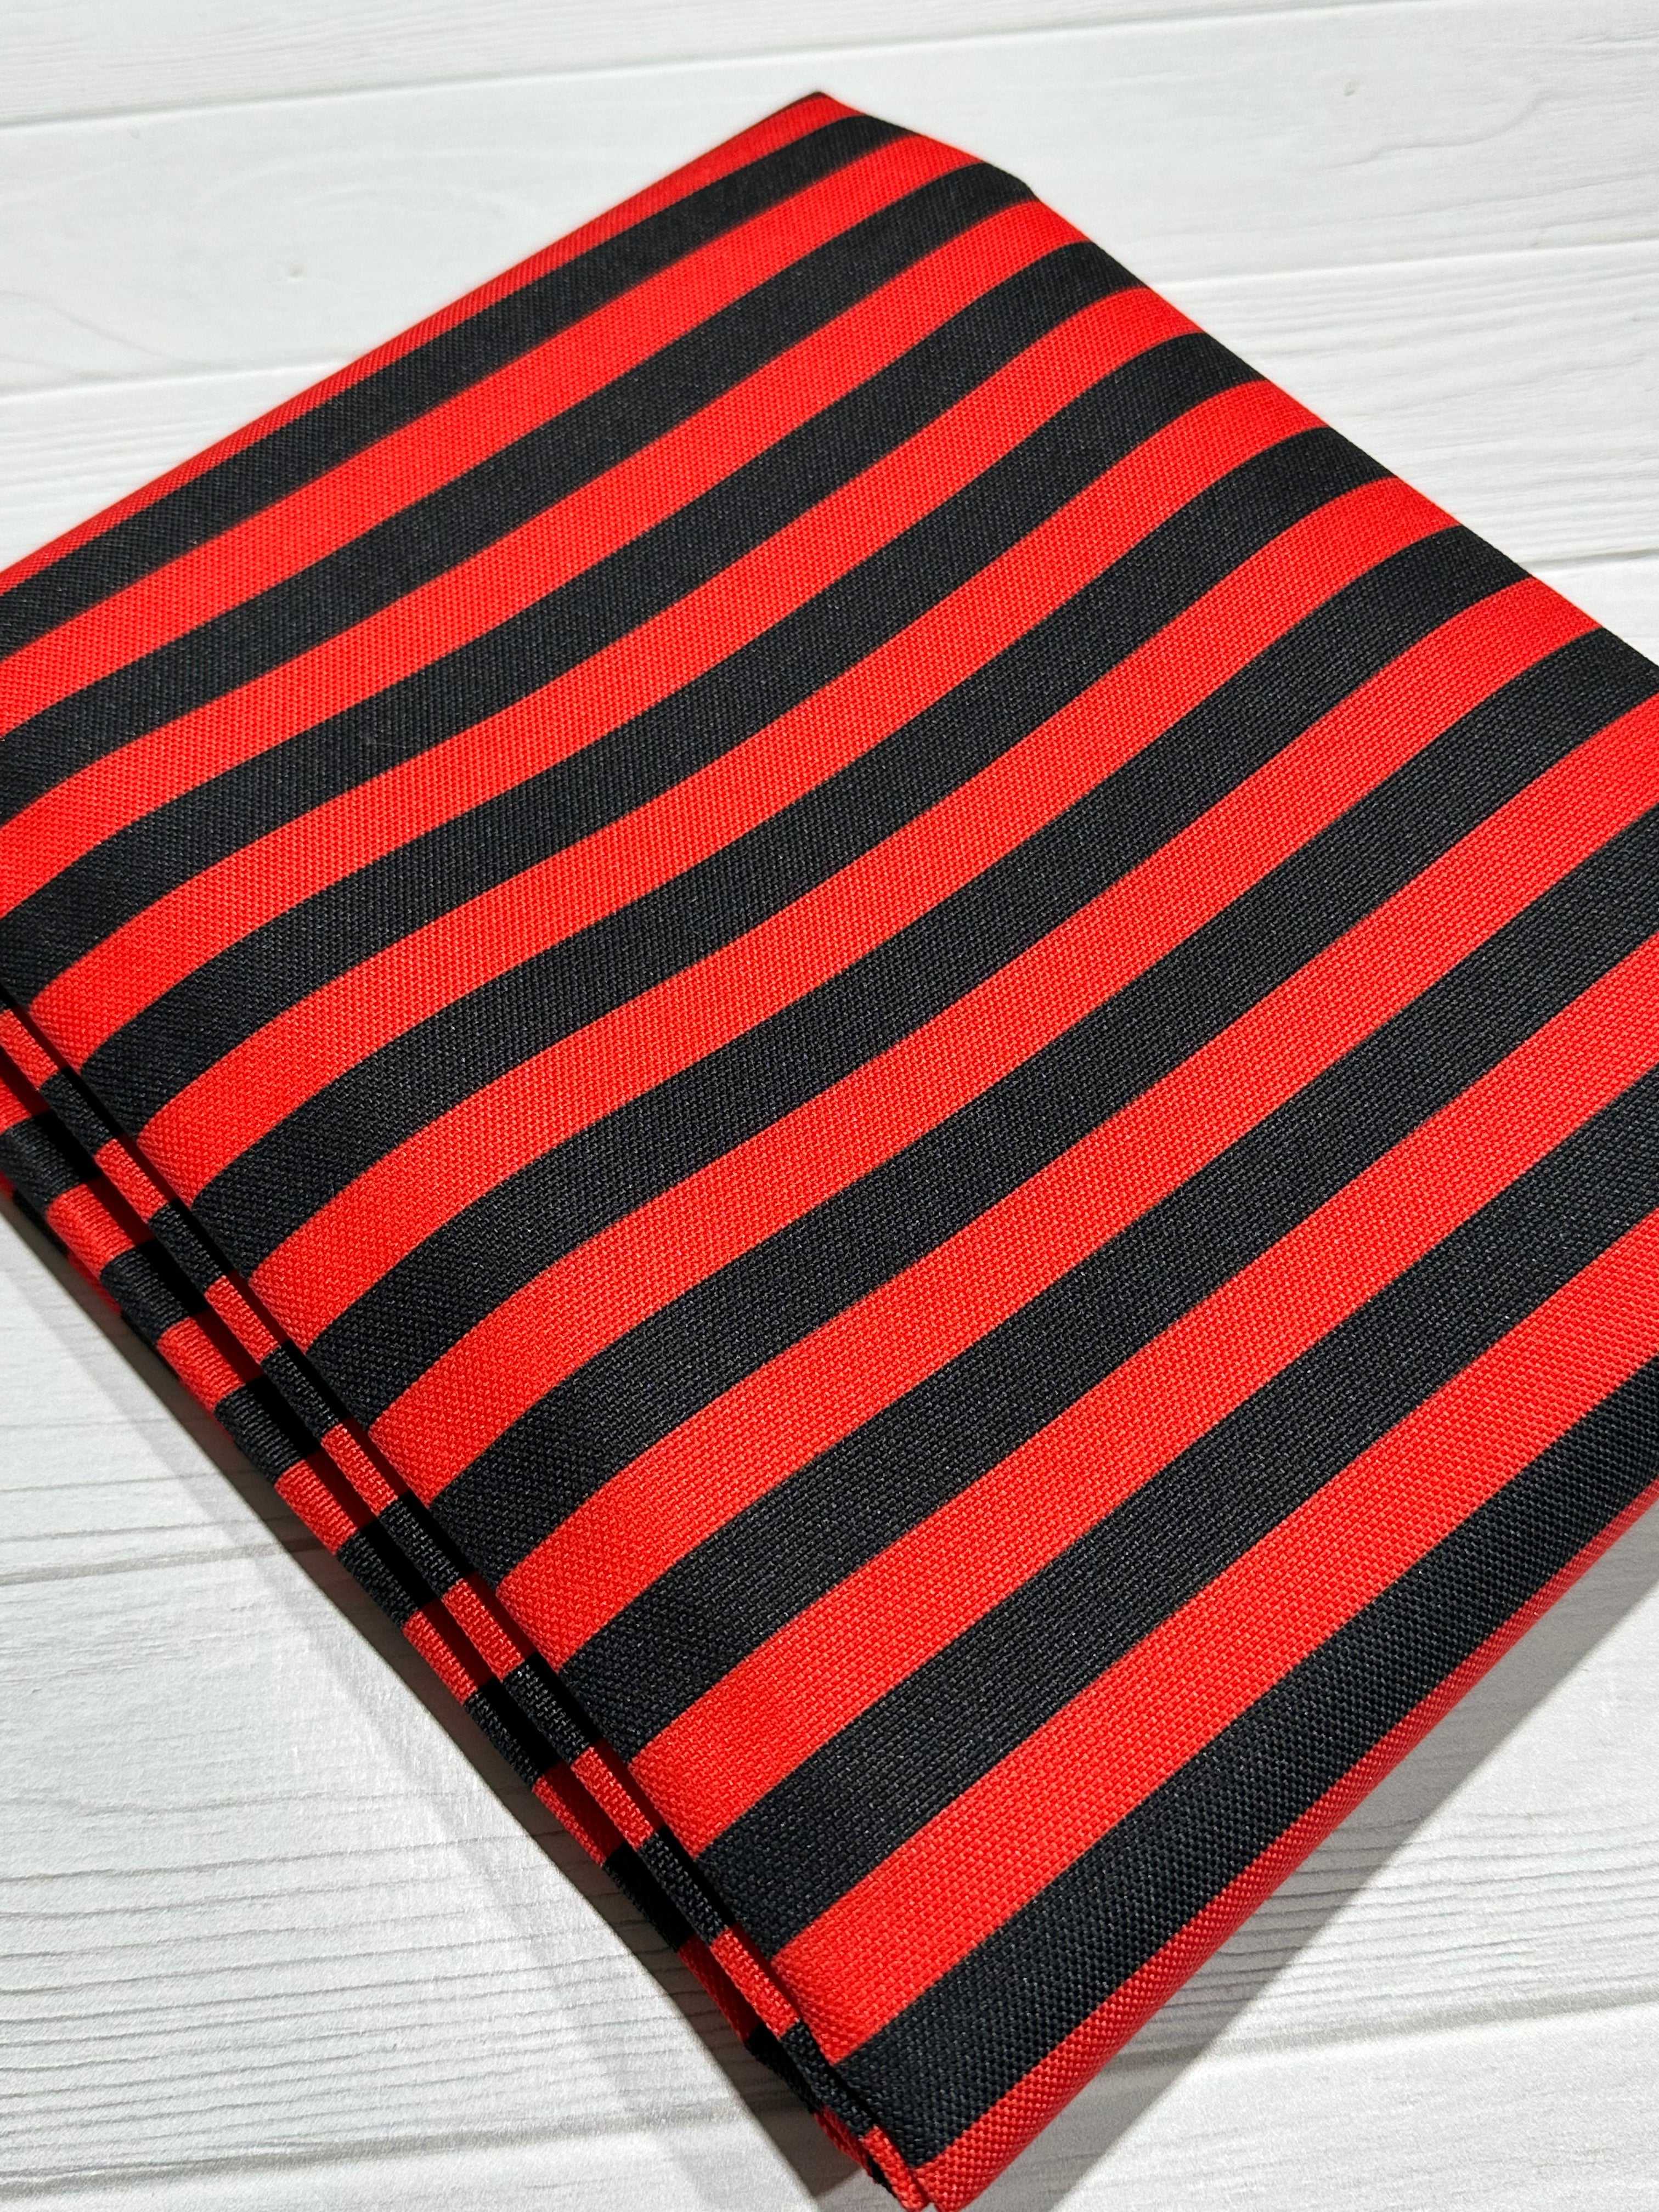 Black and Red Stripe Waterproof Canvas